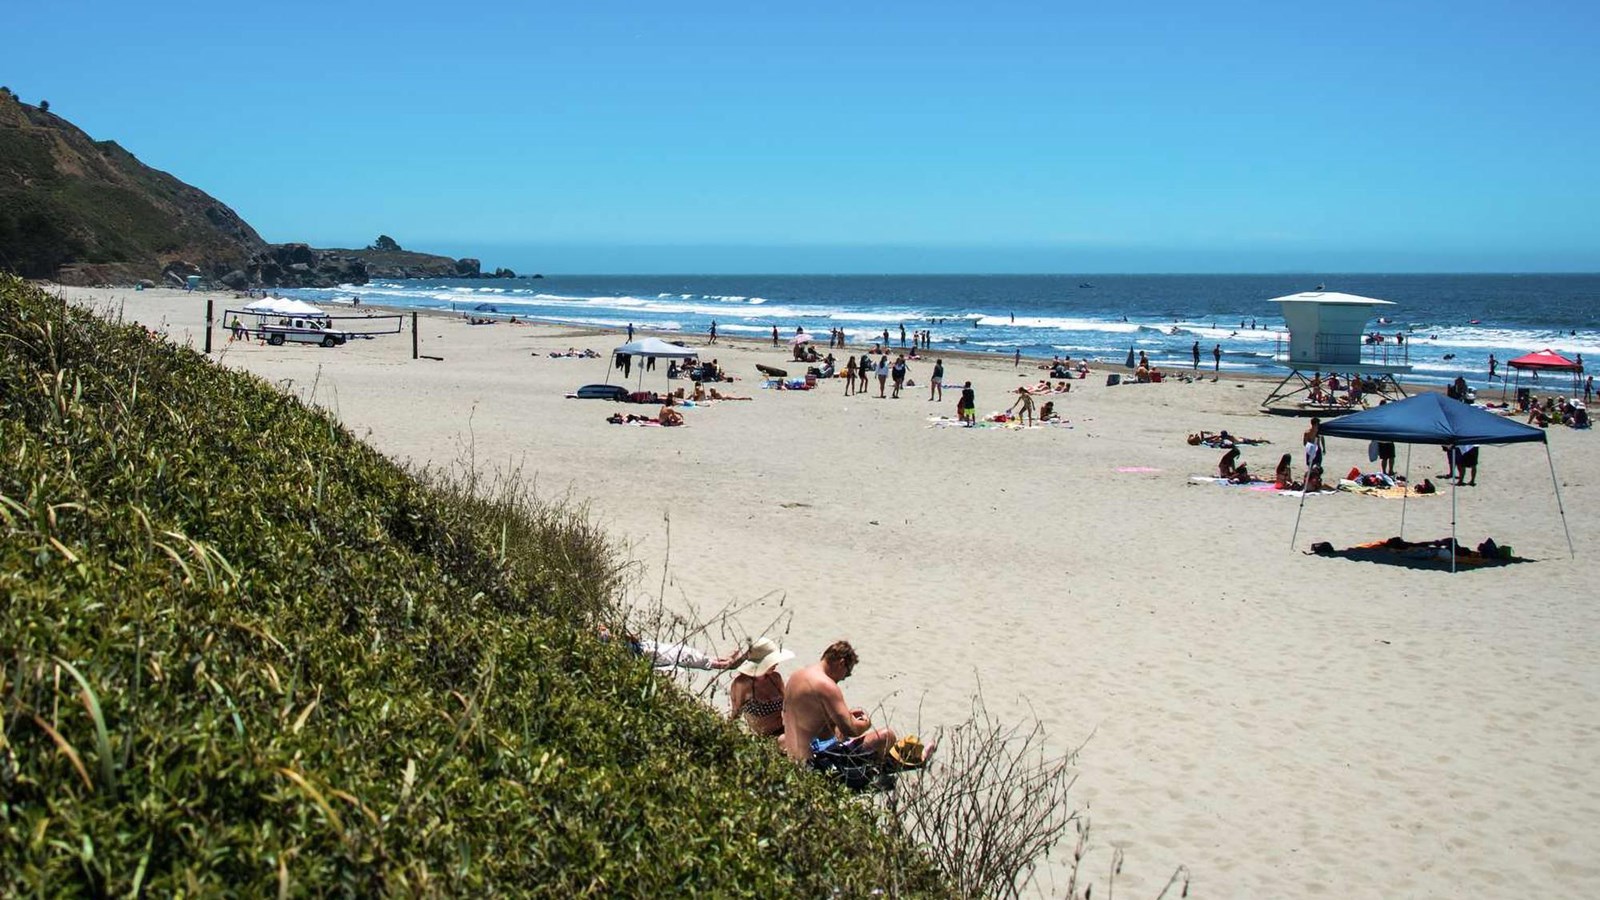 Sunny day with lots of beachgoers at Stinson Beach.